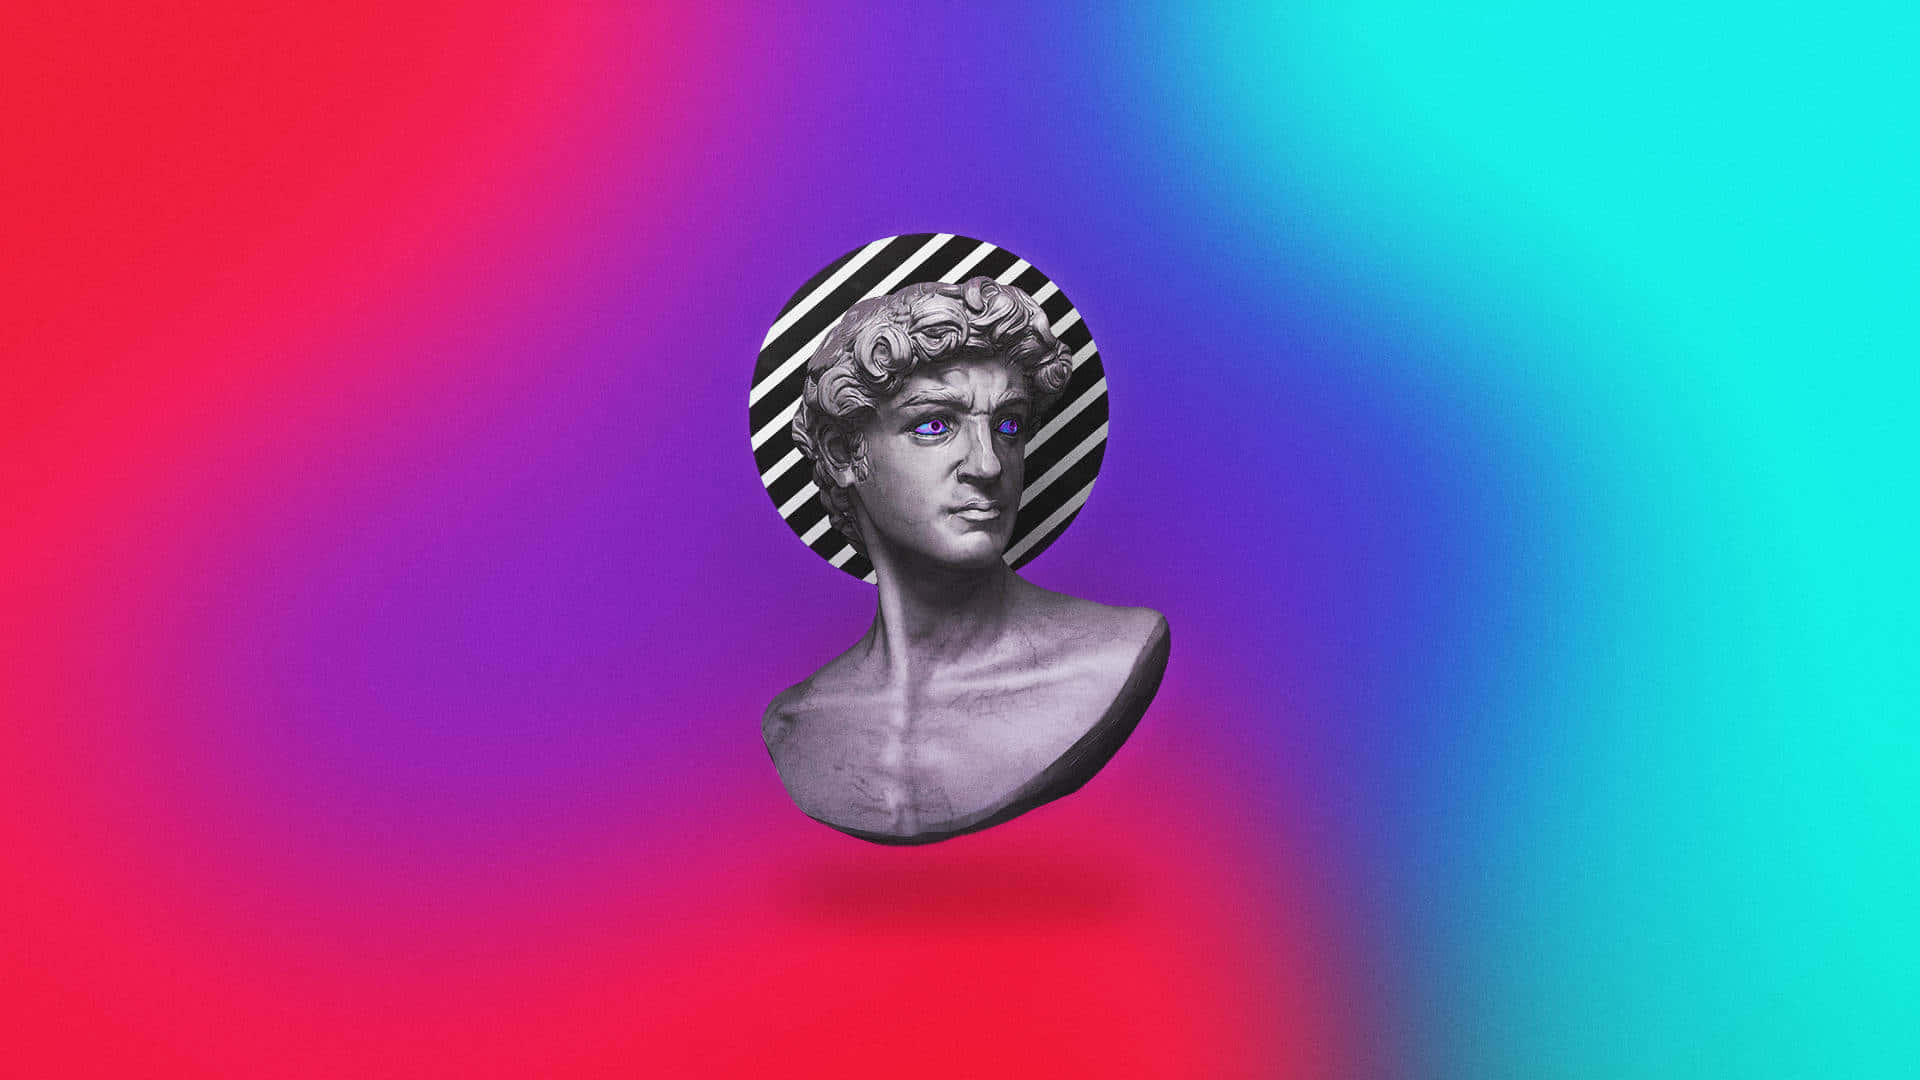 A Bust Of A Man With A Colorful Background Wallpaper